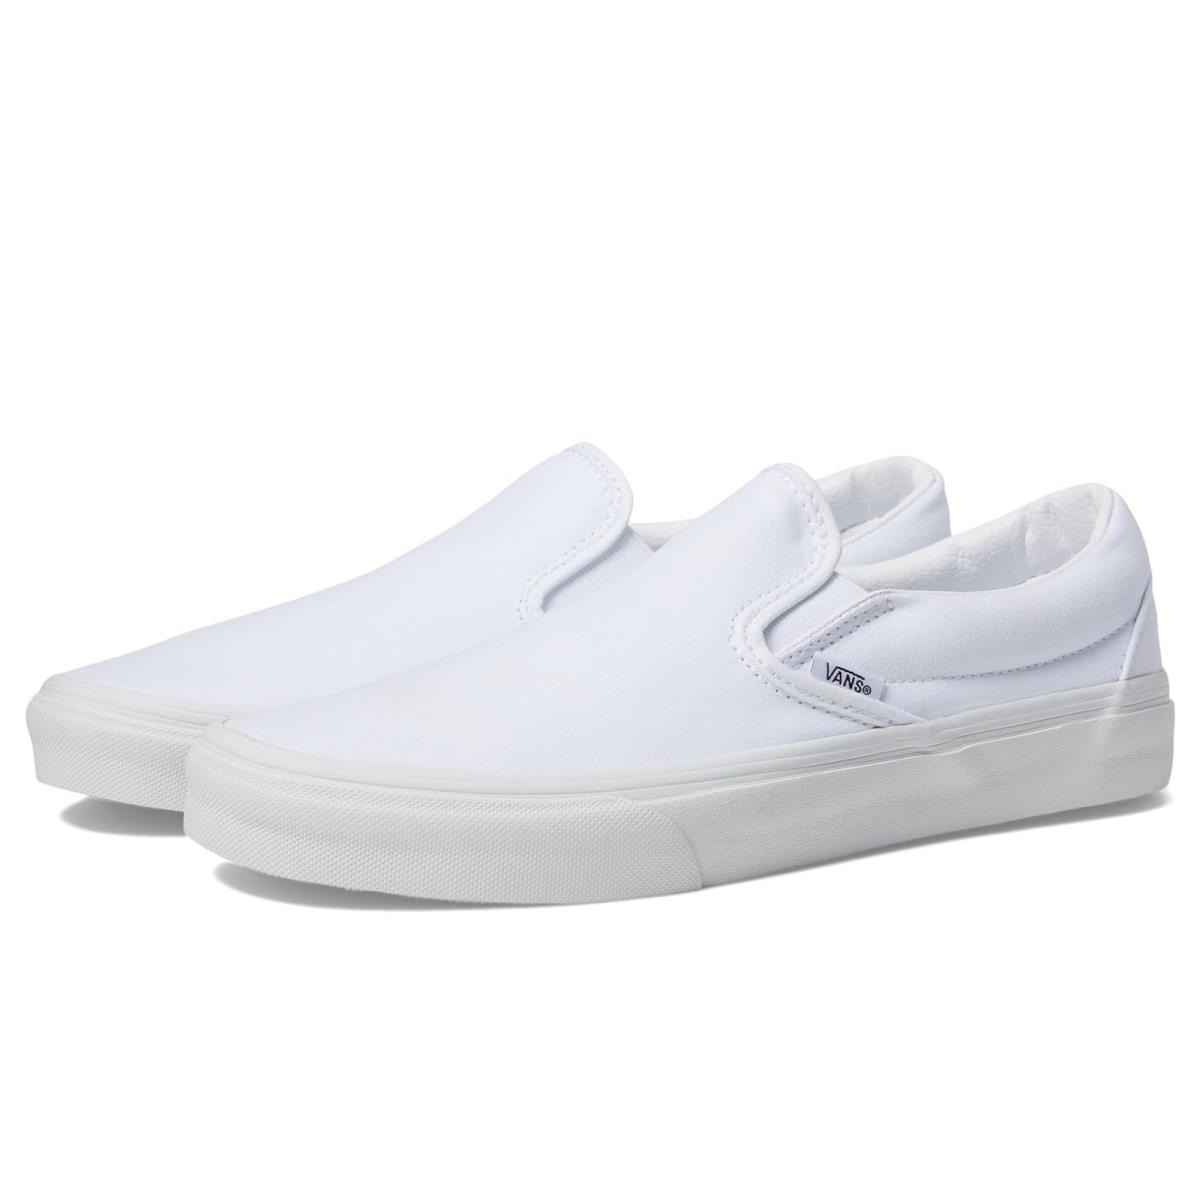 Unisex Sneakers Athletic Shoes Vans Classic Slip-on Wide Canvas True White